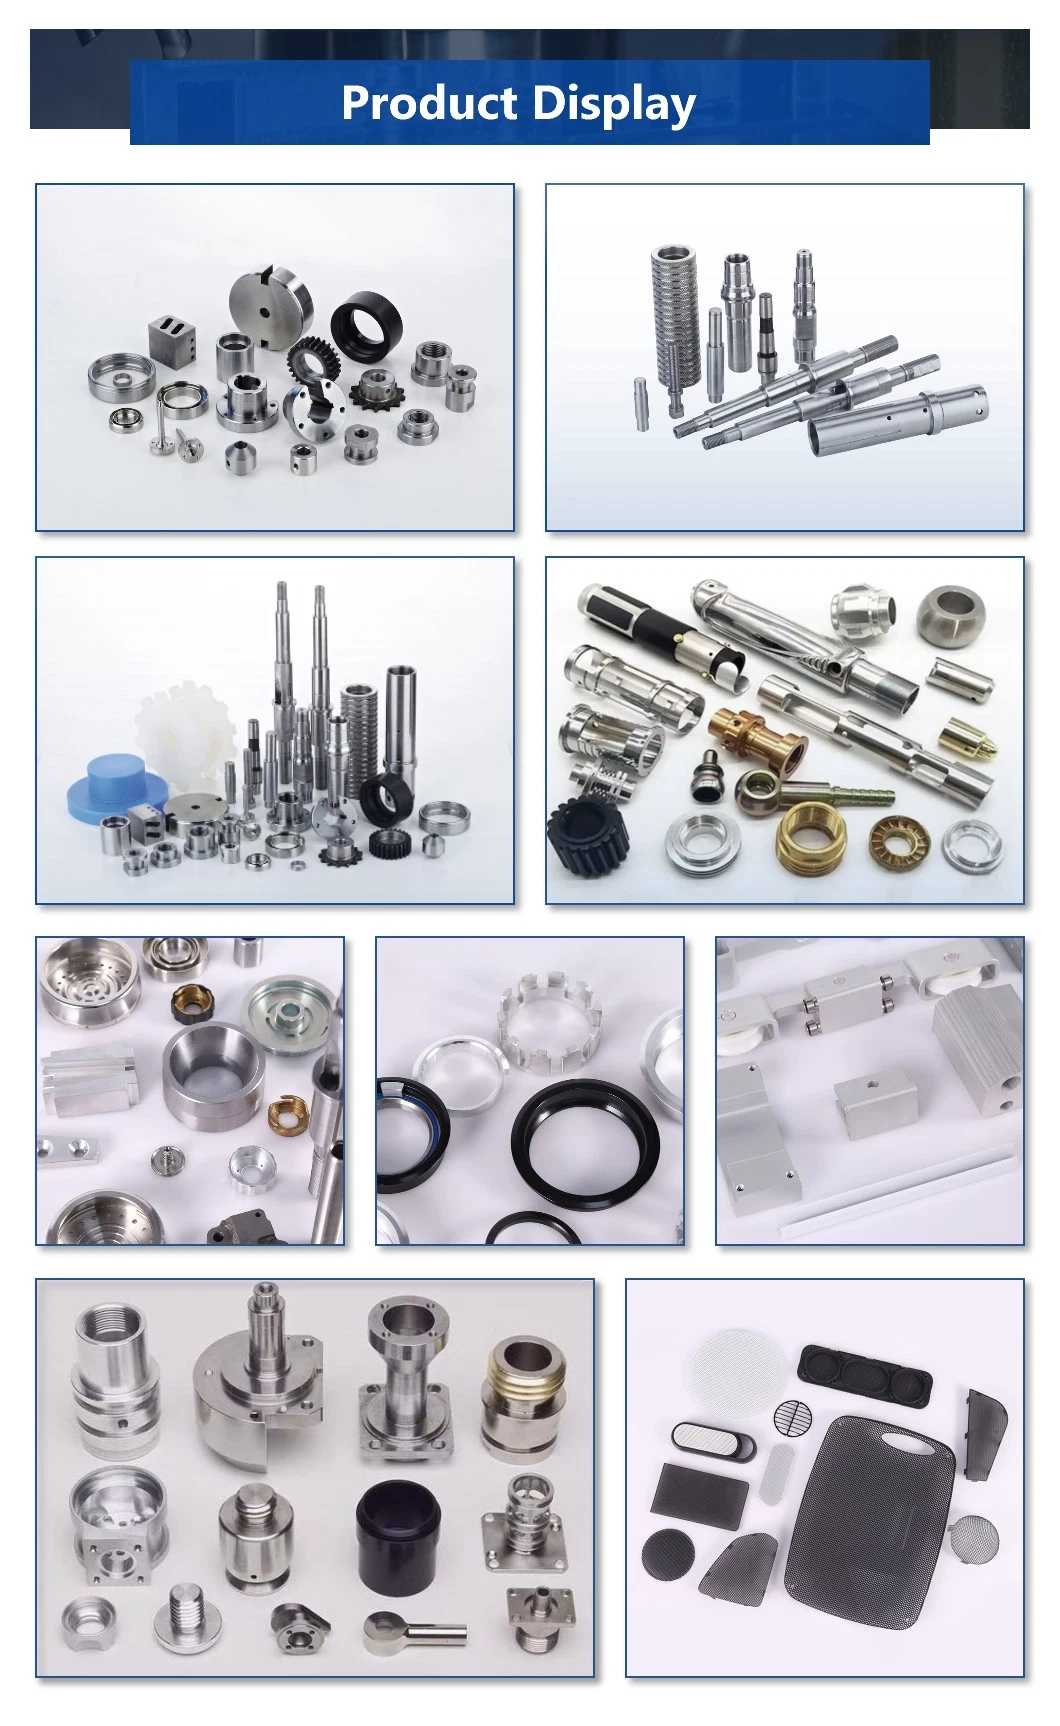 OEM Custom-Made CNC Machining Machinery Parts for Industrial Metallic Processing Machine/Metalworking/Spinning/Cutting/Recycling Machine/Detector/Sensor